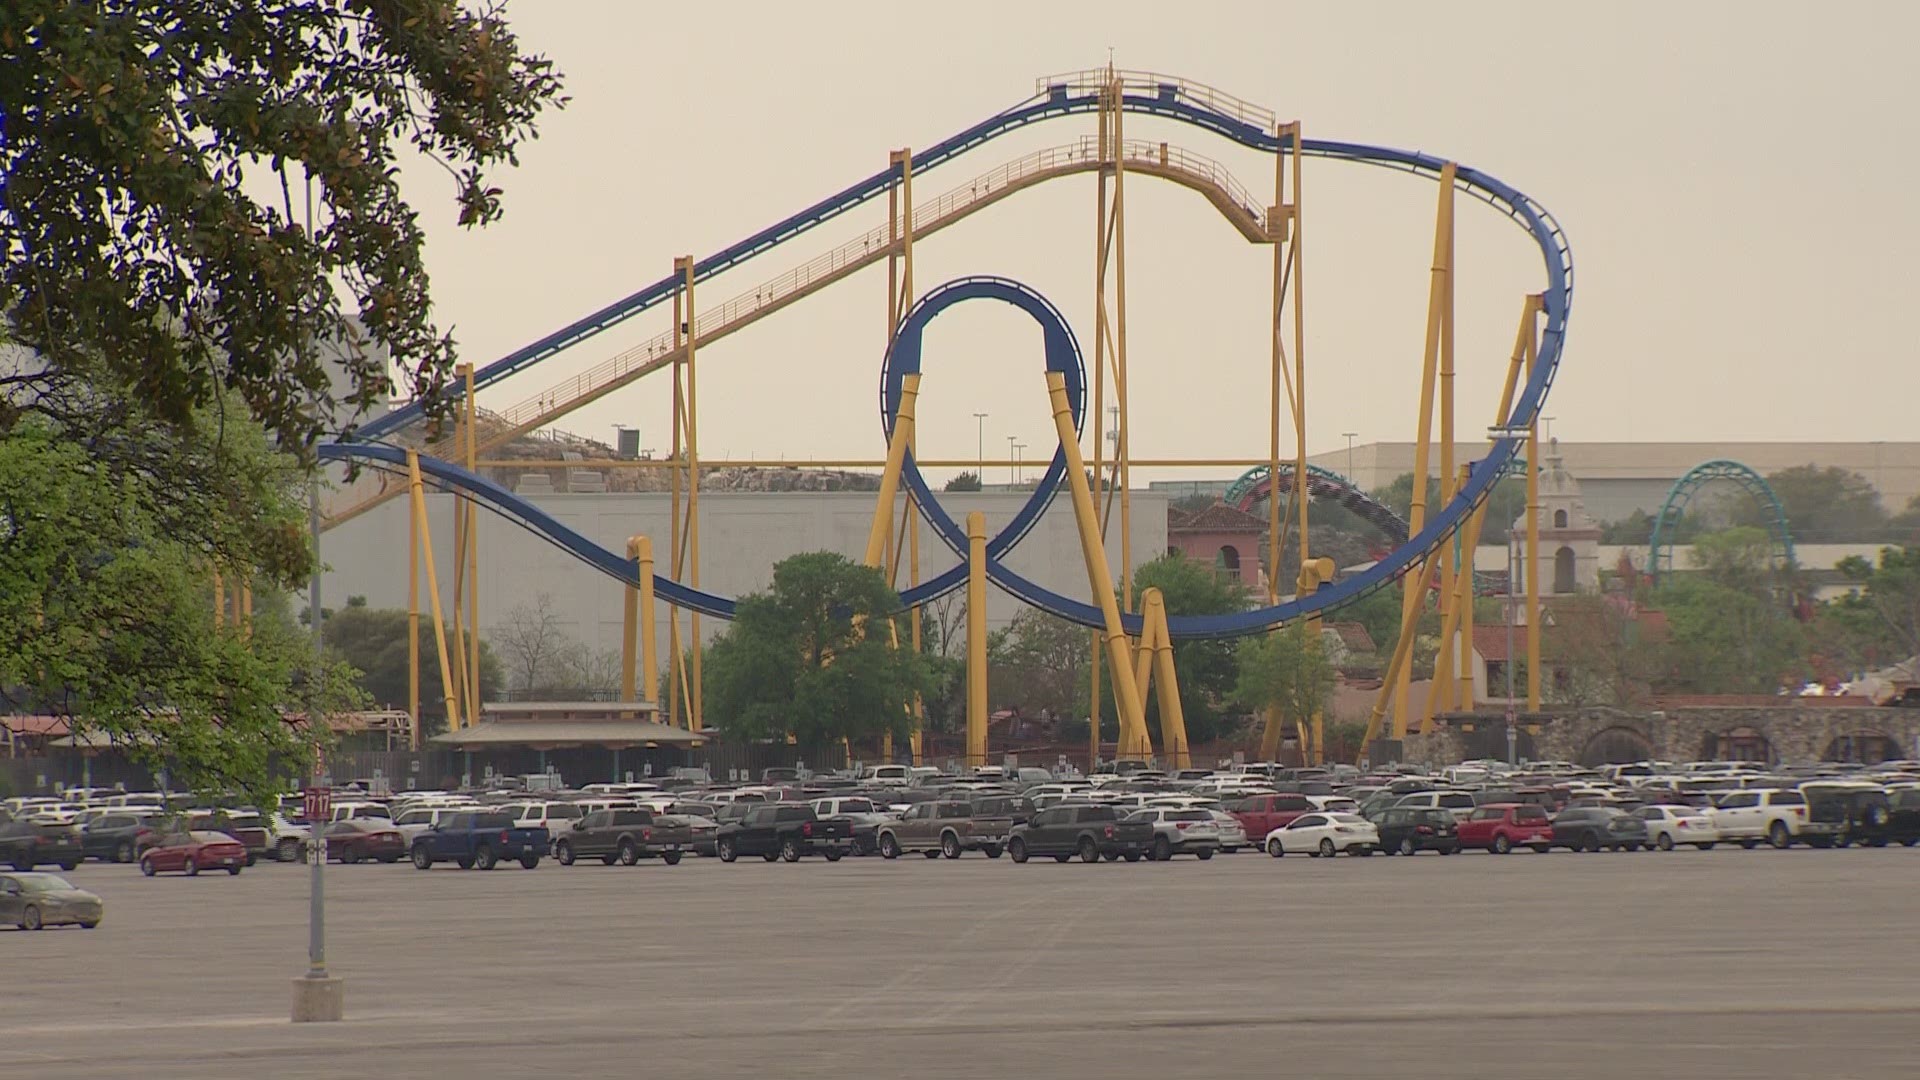 Six Flags announced it will close due to coronavirus concerns.